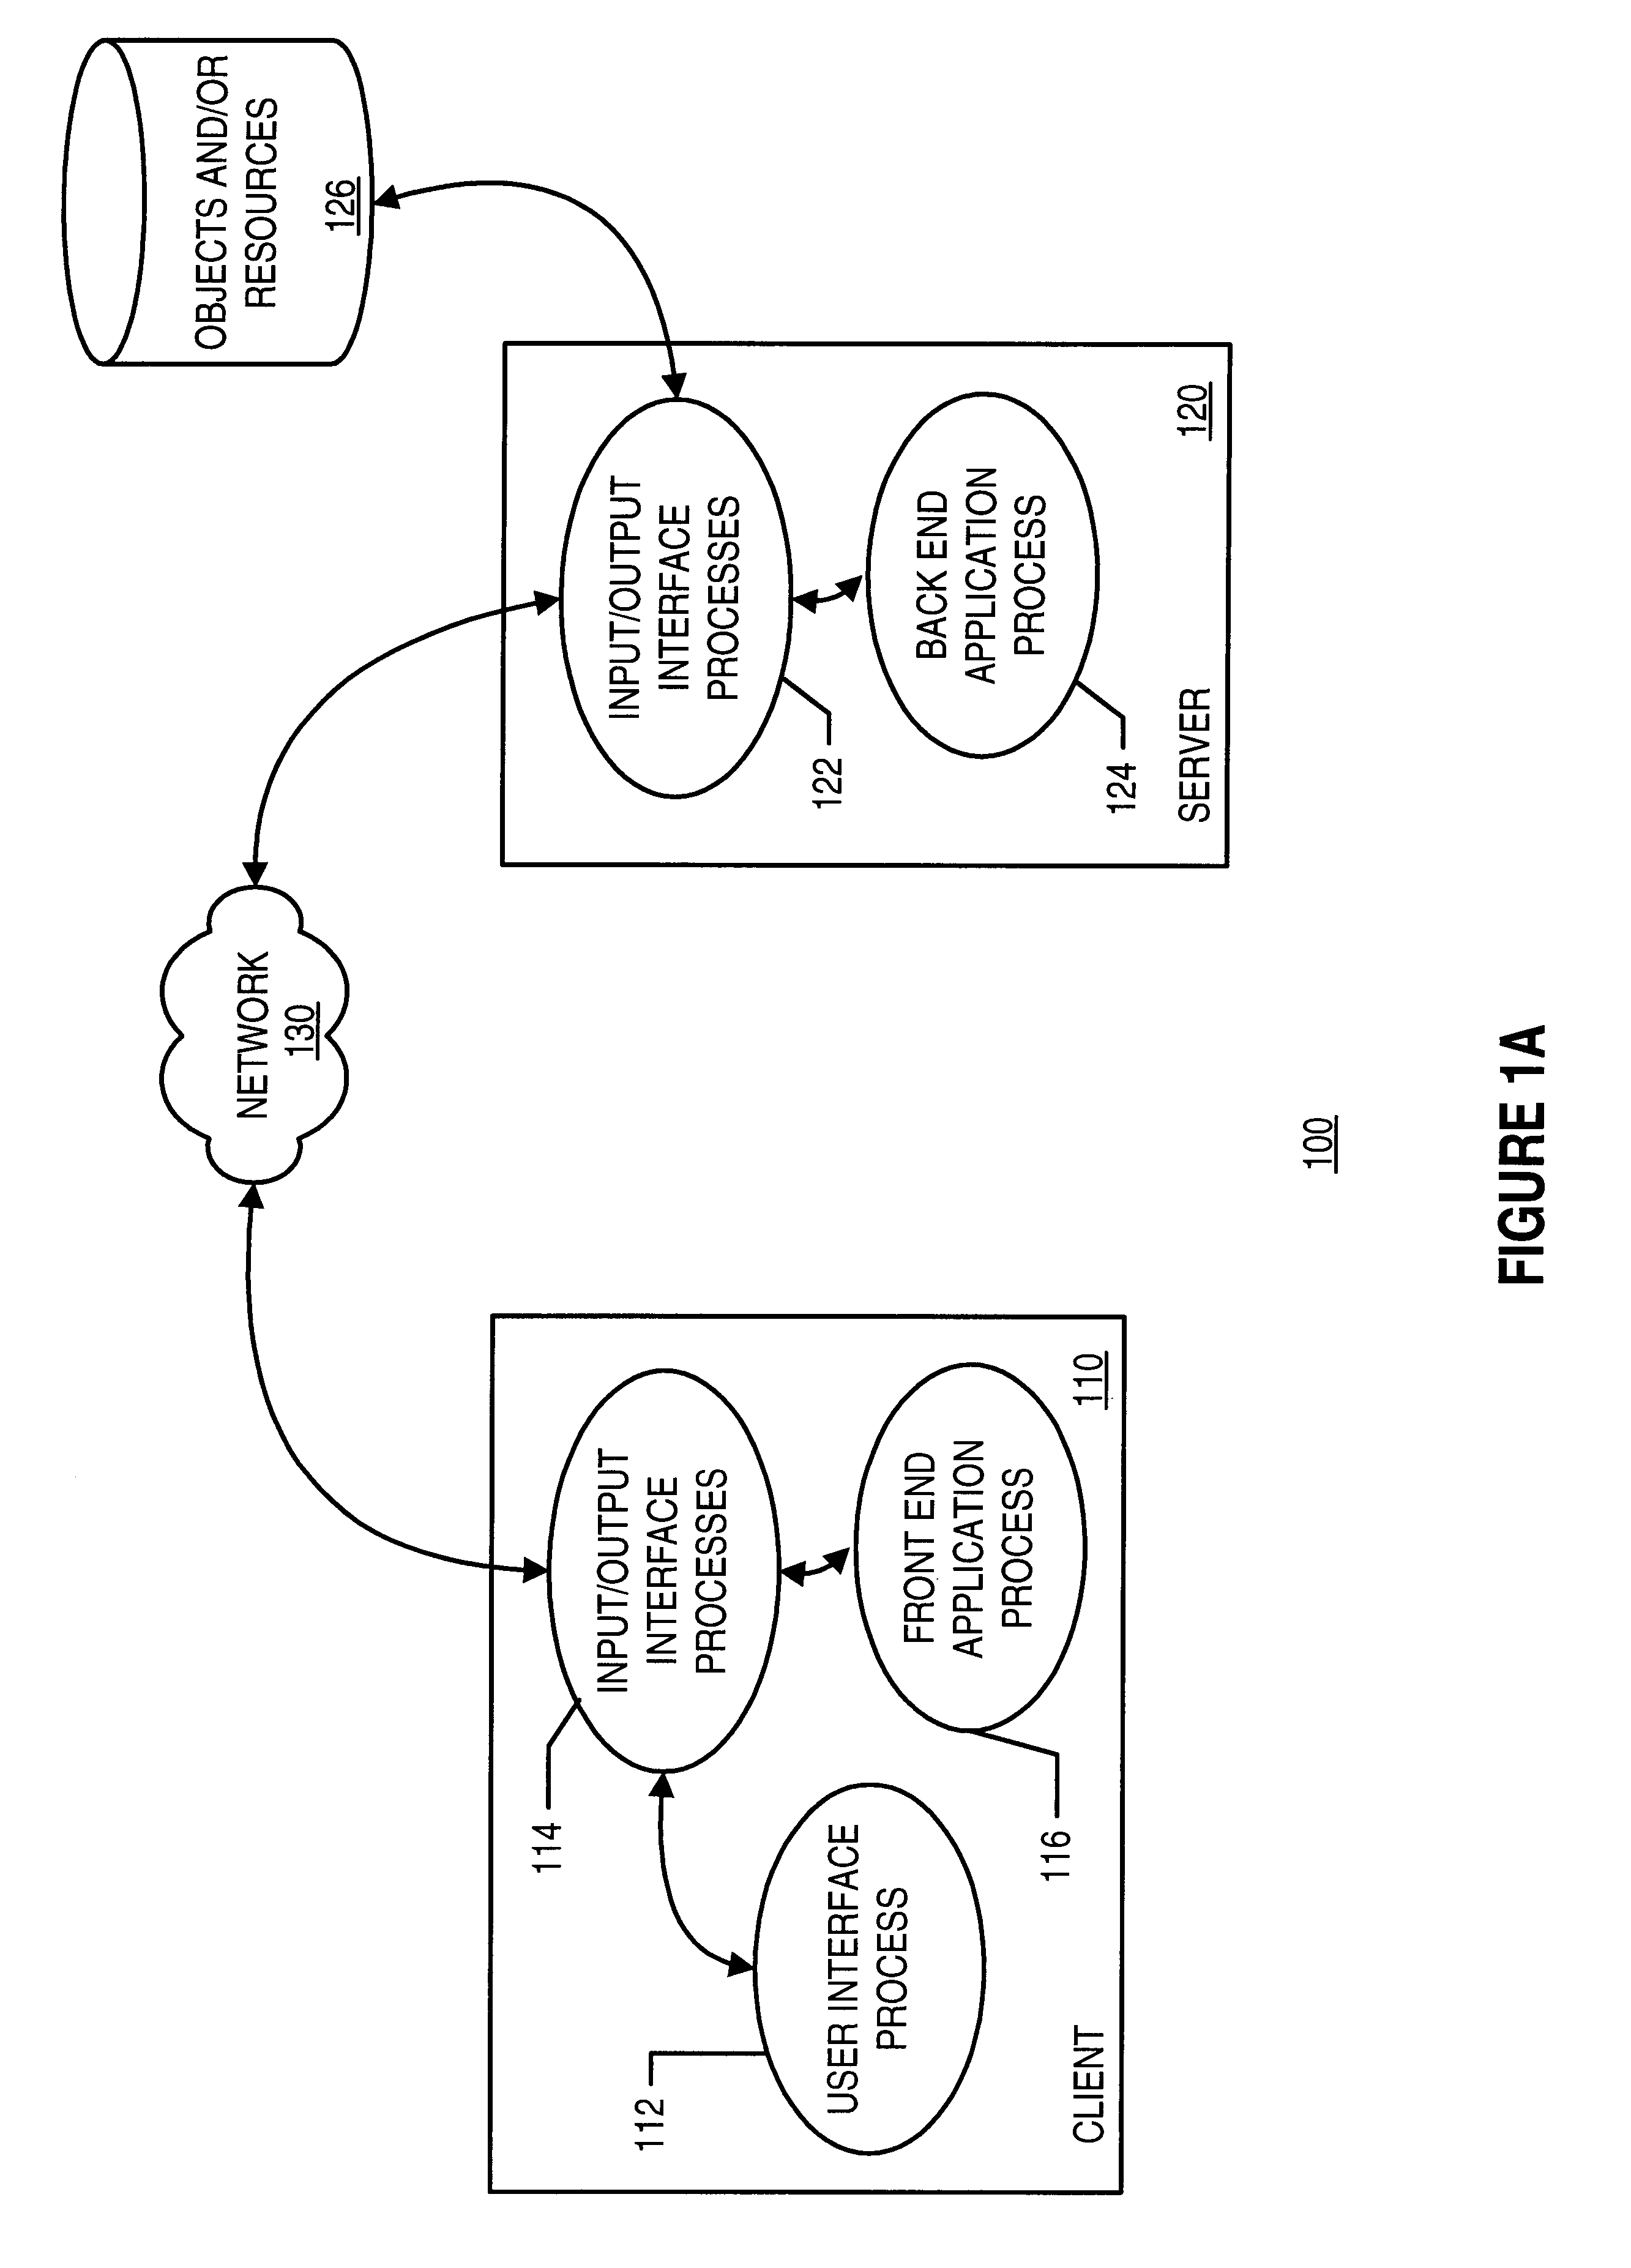 Methods and apparatus using task models for targeting marketing information to computer users based on a task being performed